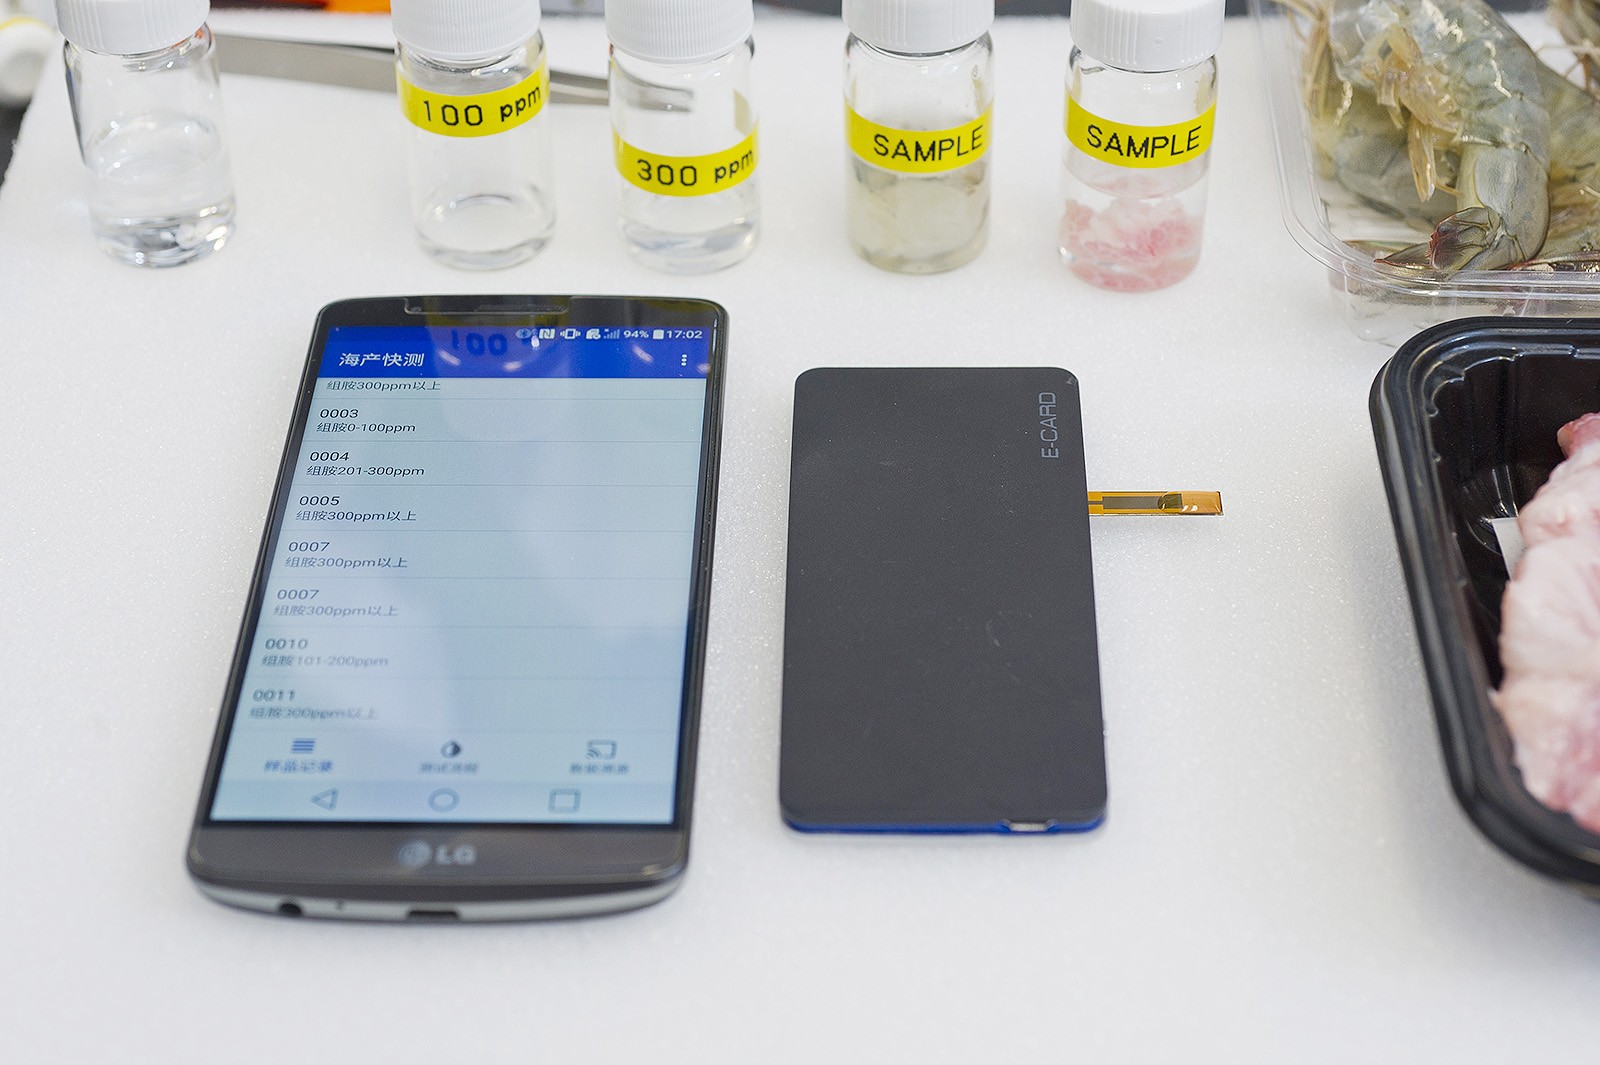 The sensor can rapidly detect food samples using a mobile phone.